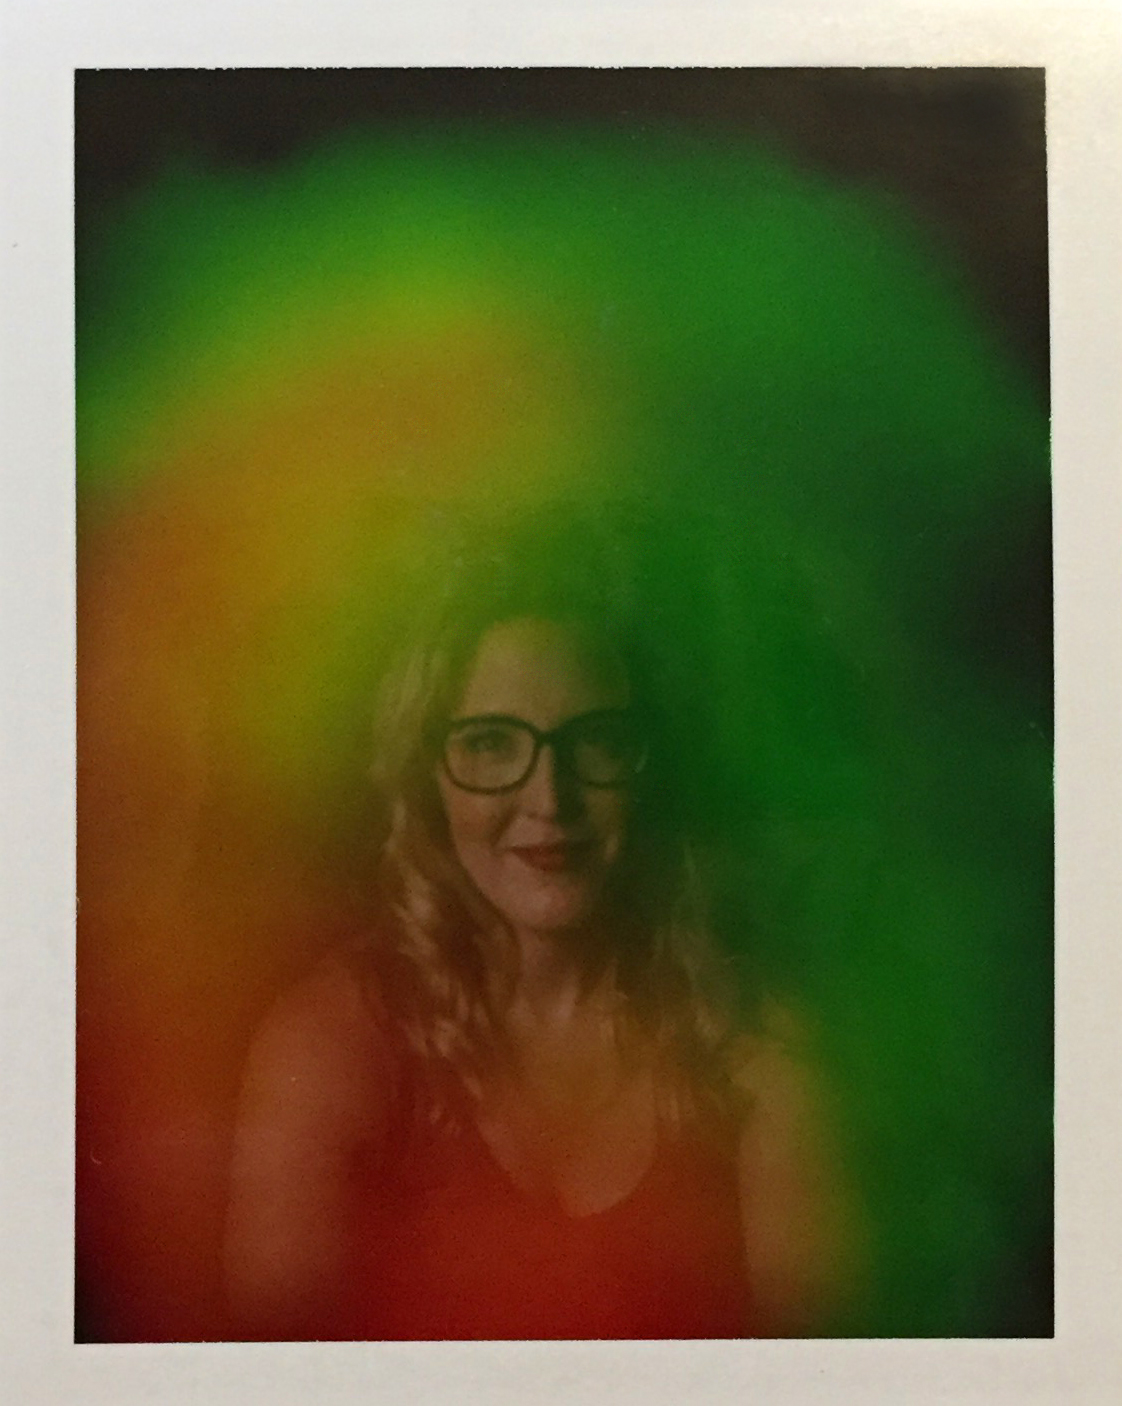 A polaroid photo of Heather, surrounded by a green, orange and red aura. She is wearing glasses and smiling softly. 